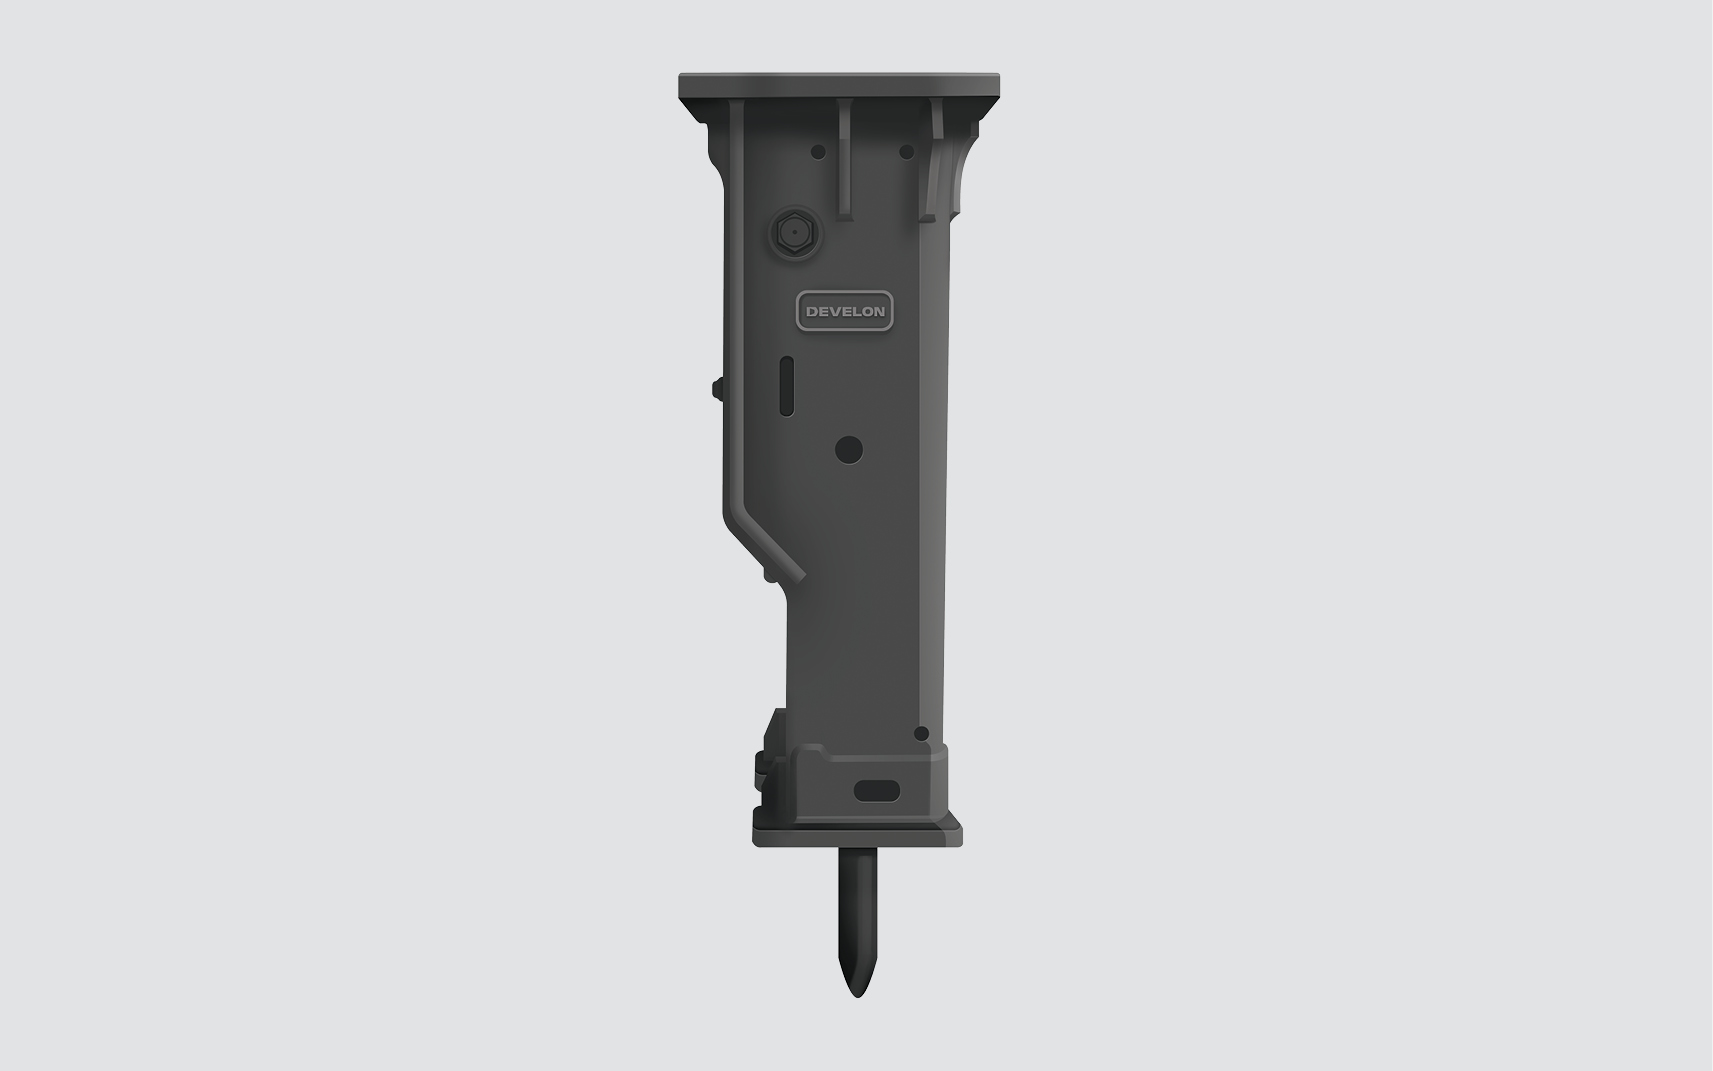 HB-Series hydraulic breaker for use with select DEVELON excavators.